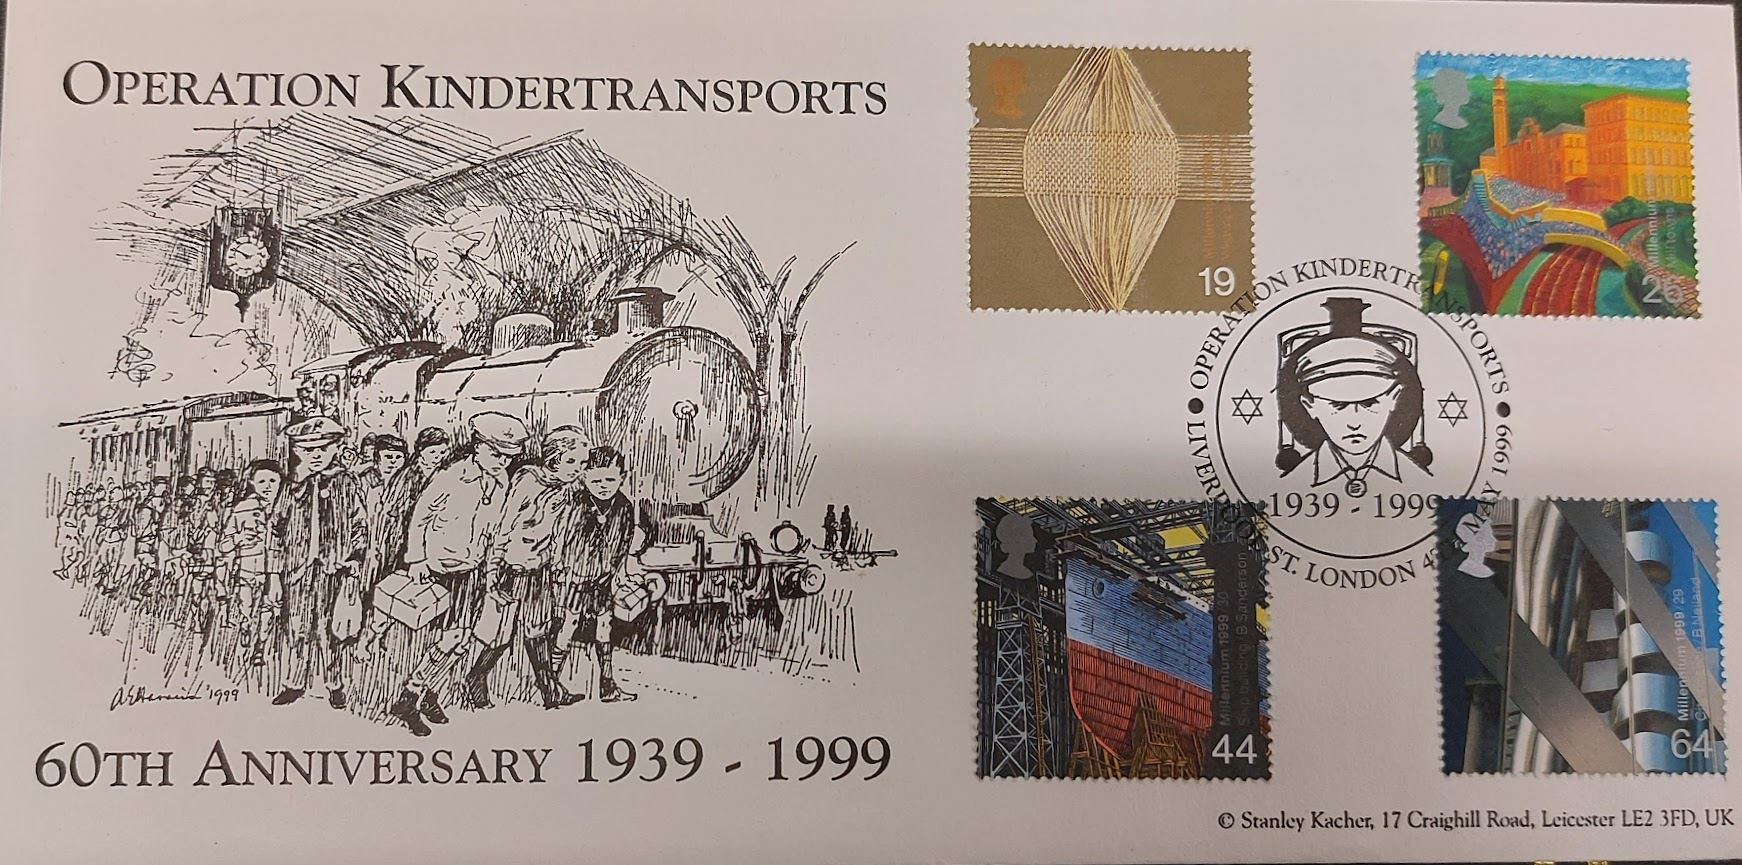 Decorated commemorative cover (decorated envelope) with a sketch of a train with children arriving on the platform, and 4 stamps, and special postmark stamp. Text reads Operation Kindertransports 60th Anniversary 1939-1999